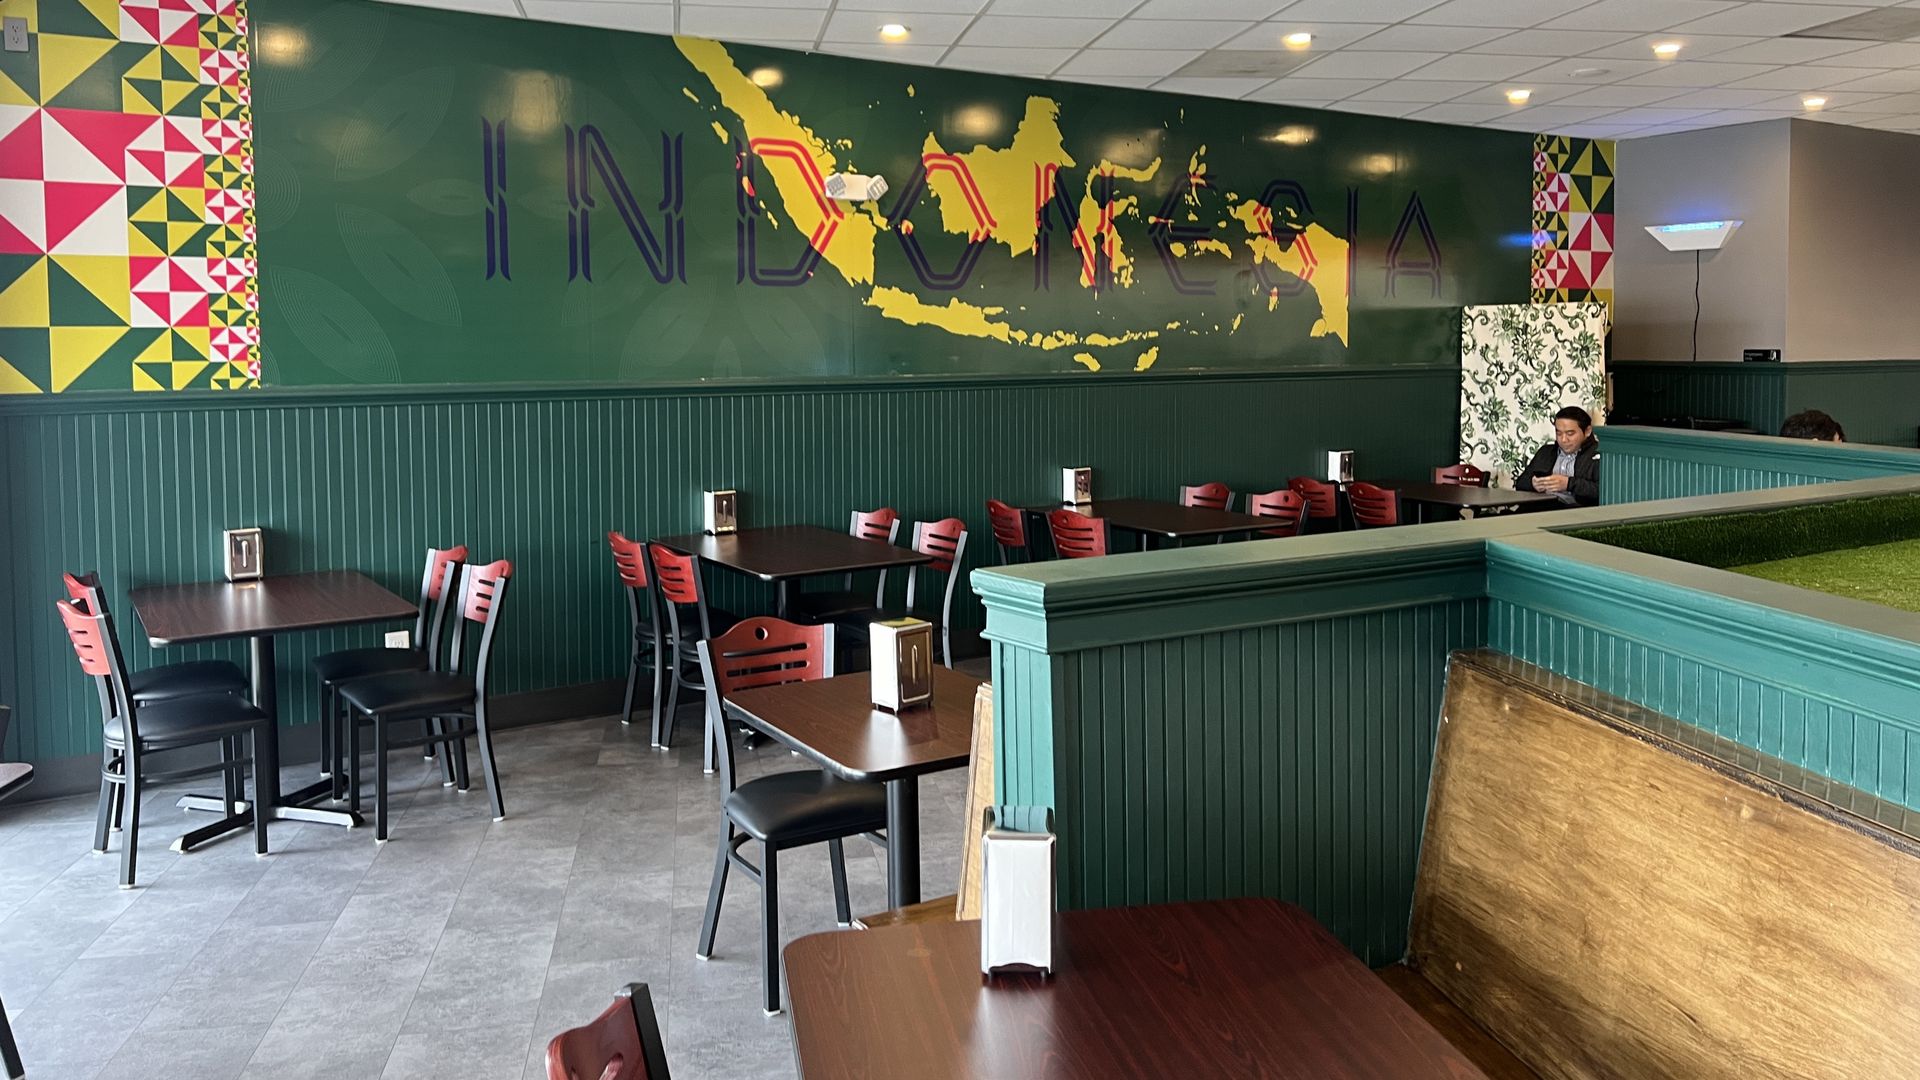 Inside restaurant with mural that reads "Indonesia"